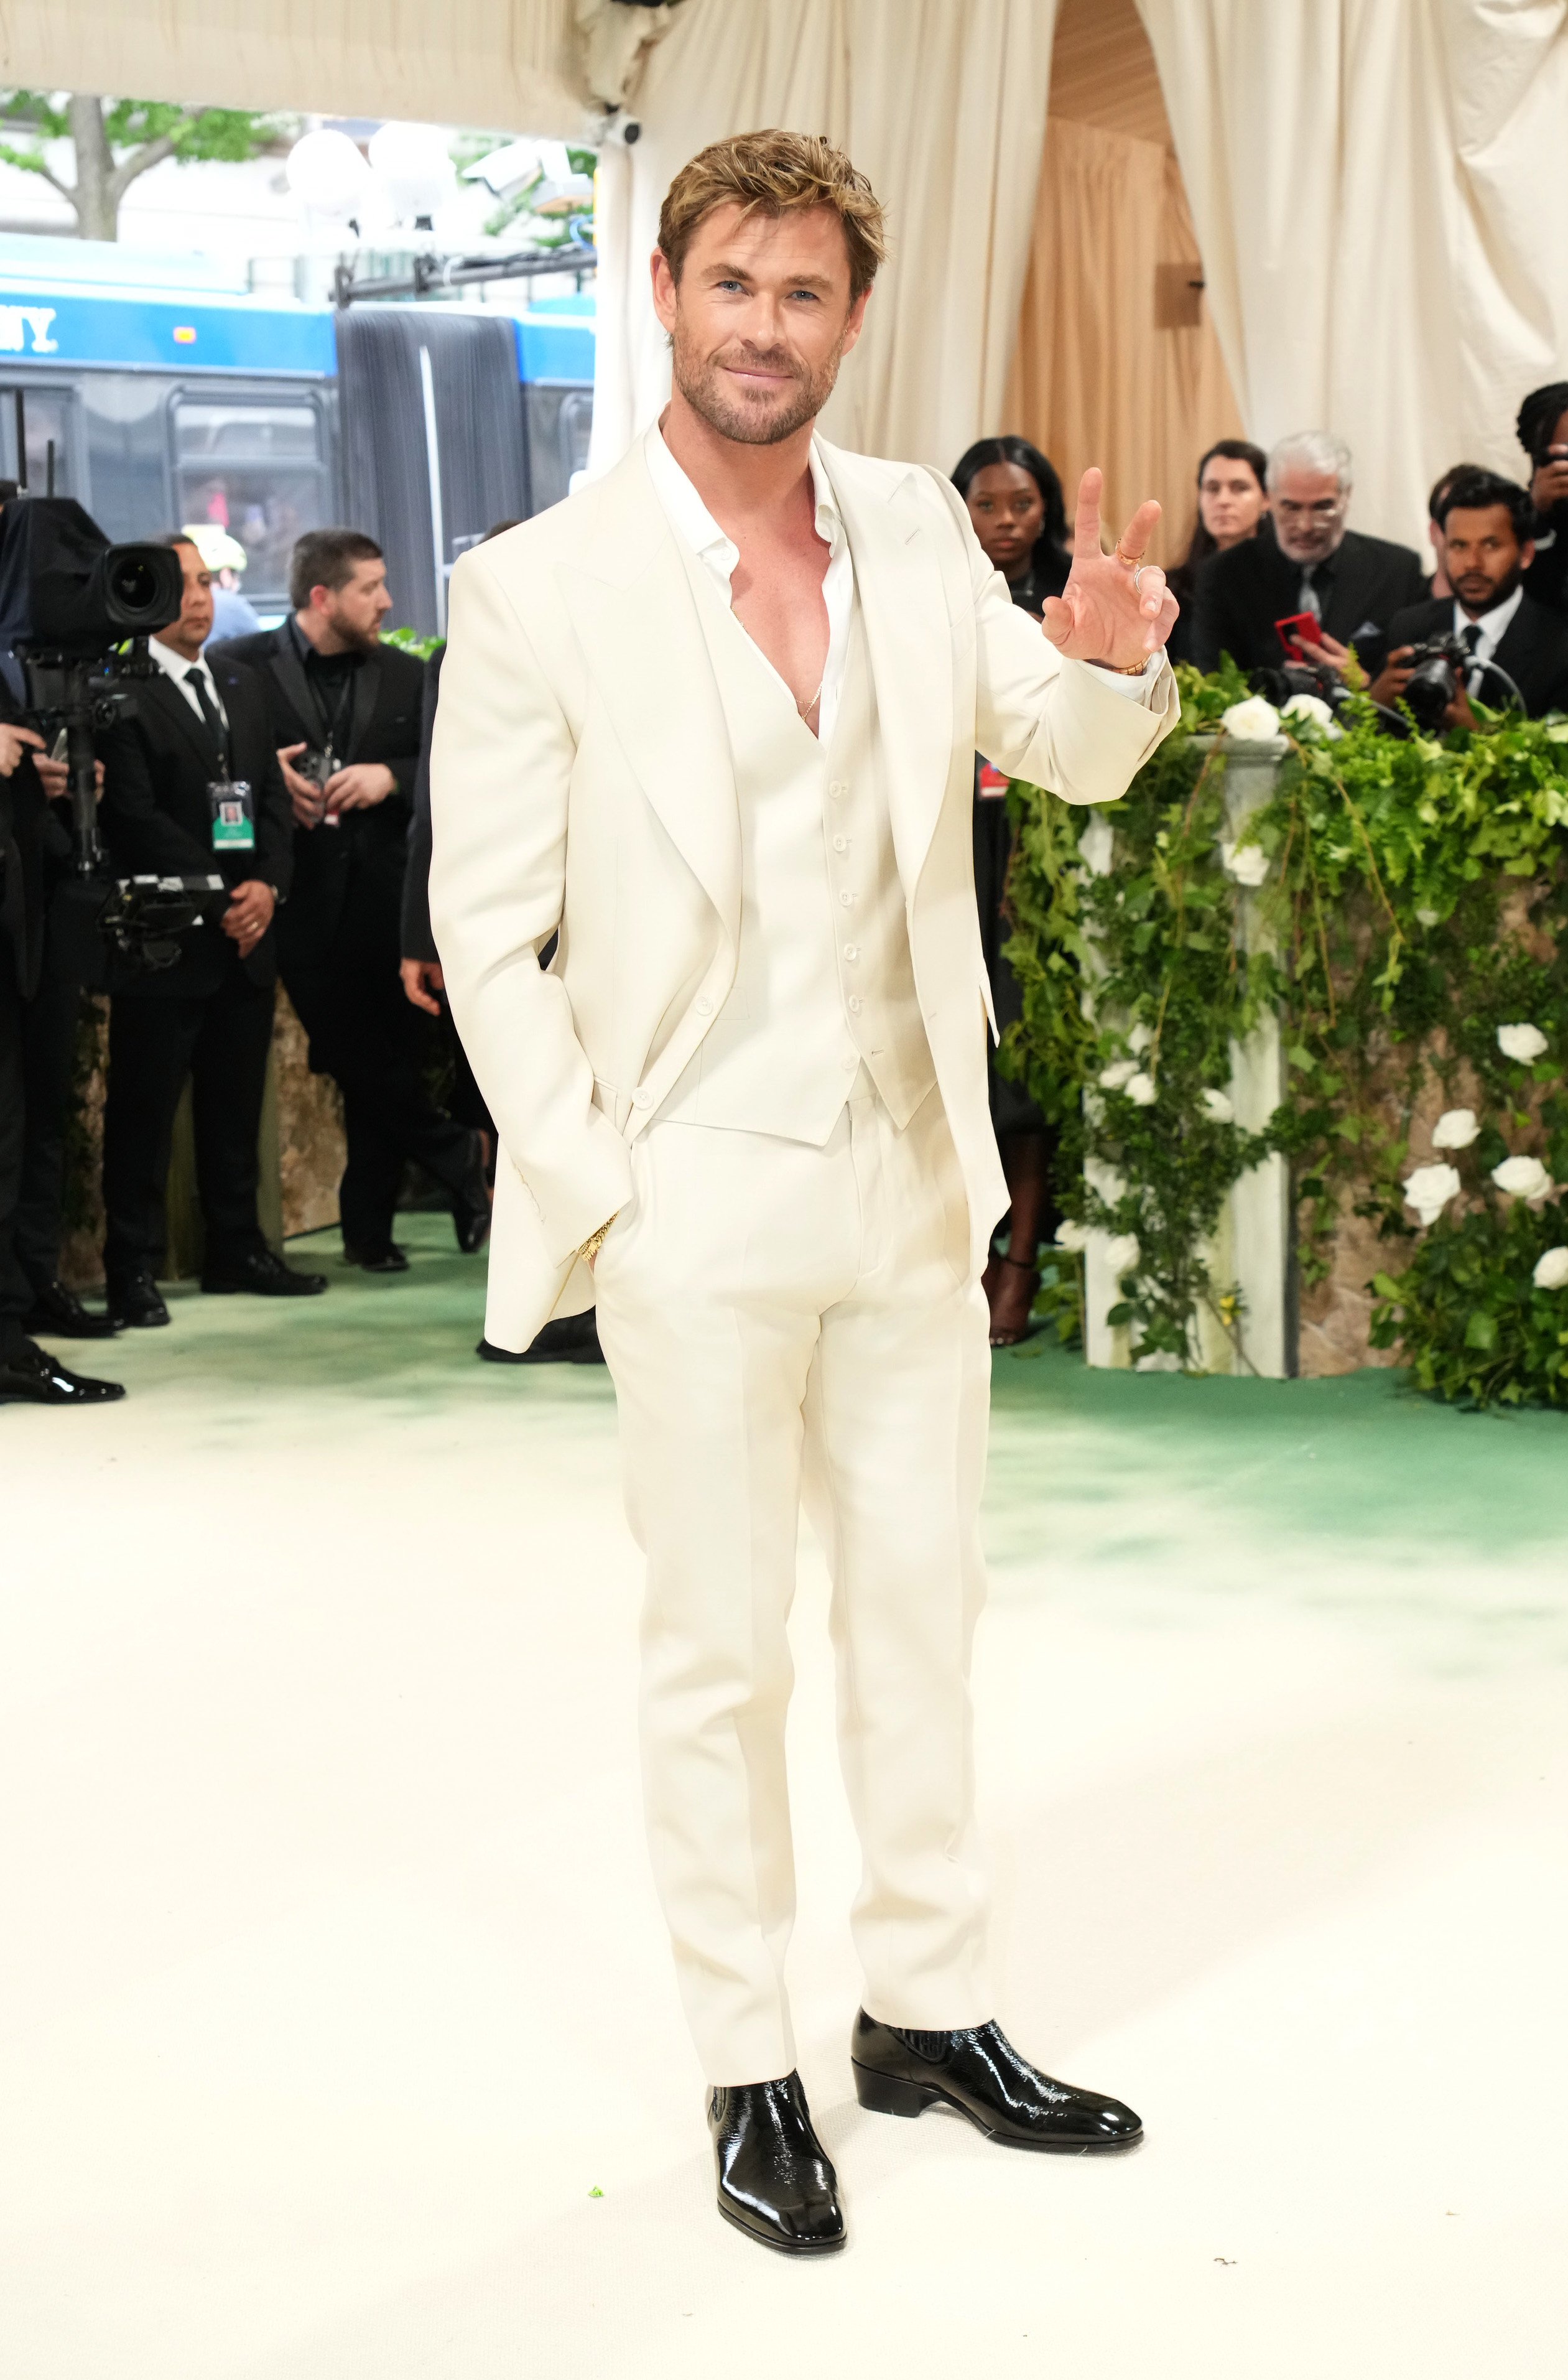 Chris Hemsworth in a white suit and black shoes flashing a peace sign at an event